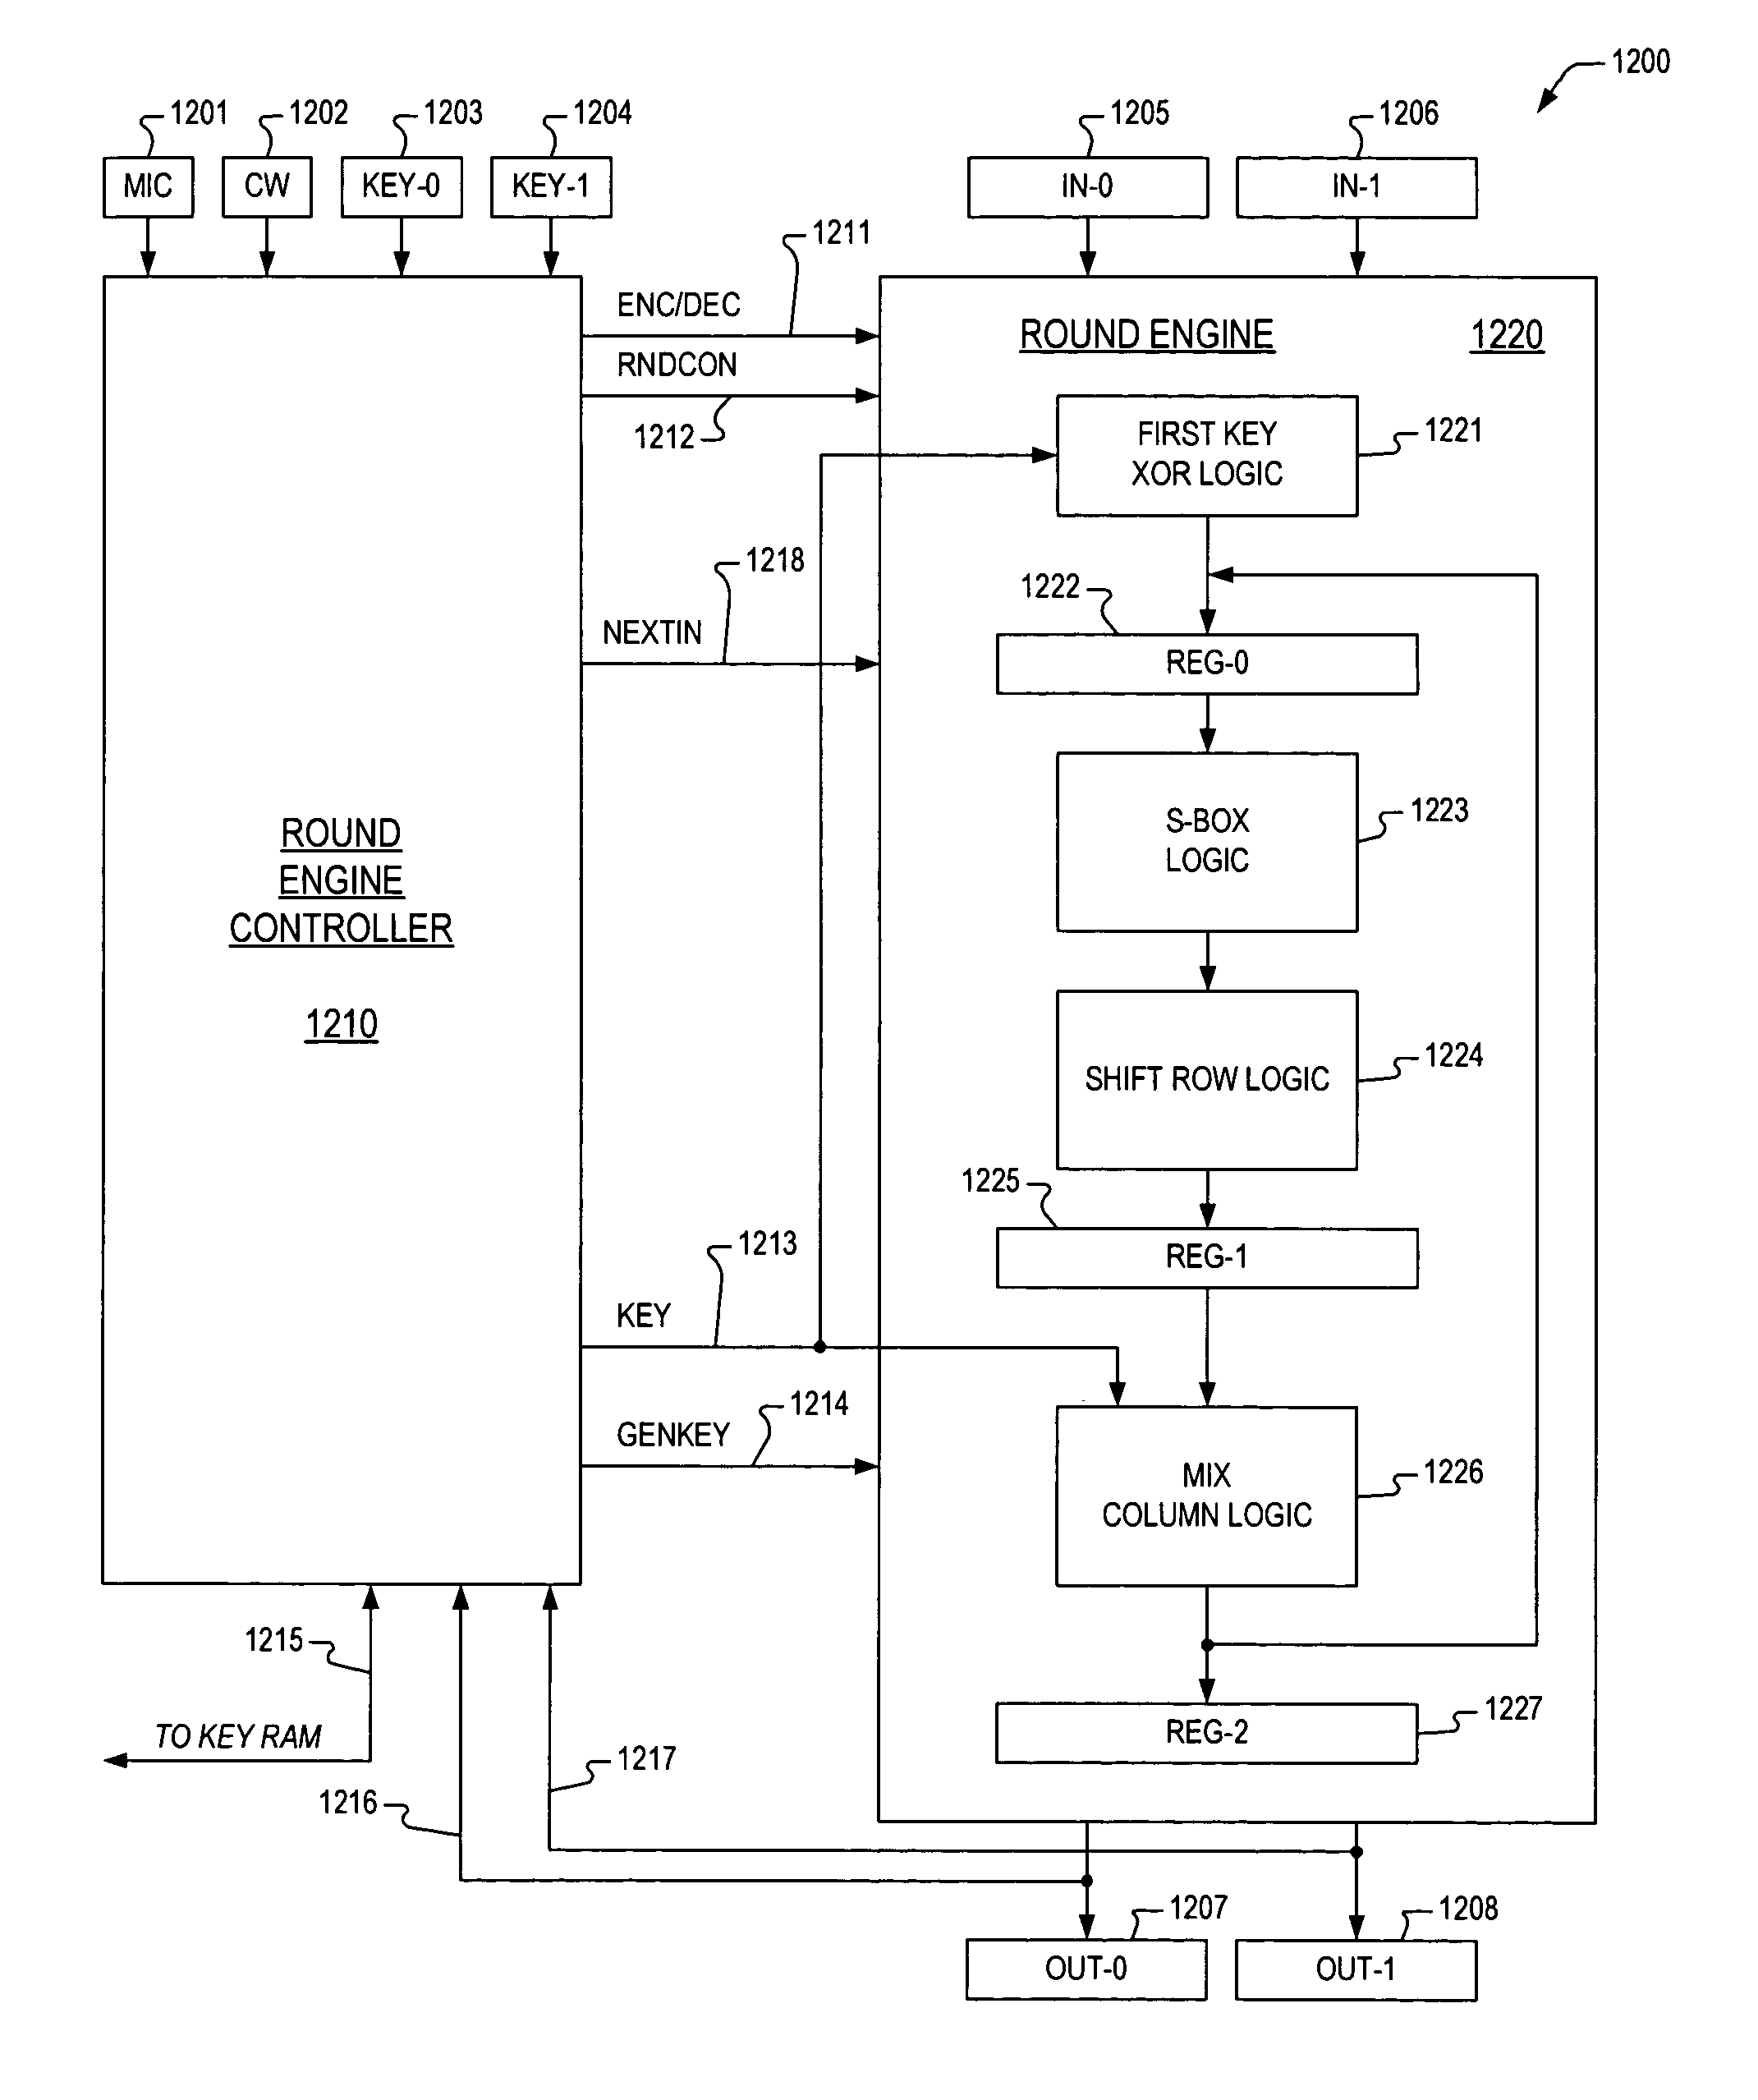 Microprocessor apparatus and method for performing block cipher cryptographic functions